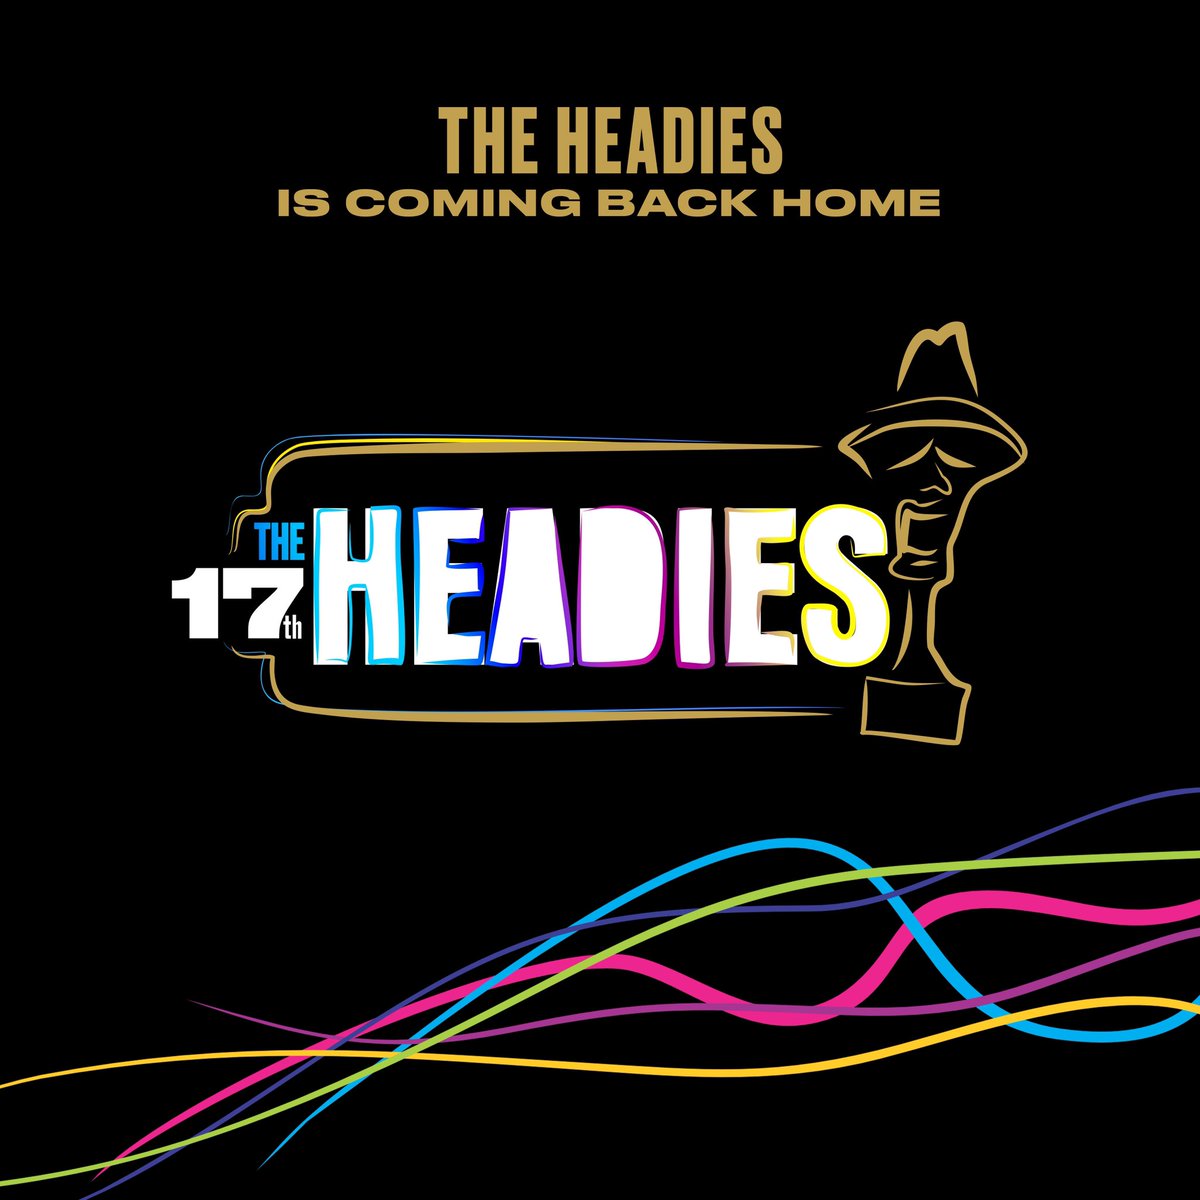 RT if you are excited that the #17thHeadies is coming back to Home! 🇳🇬